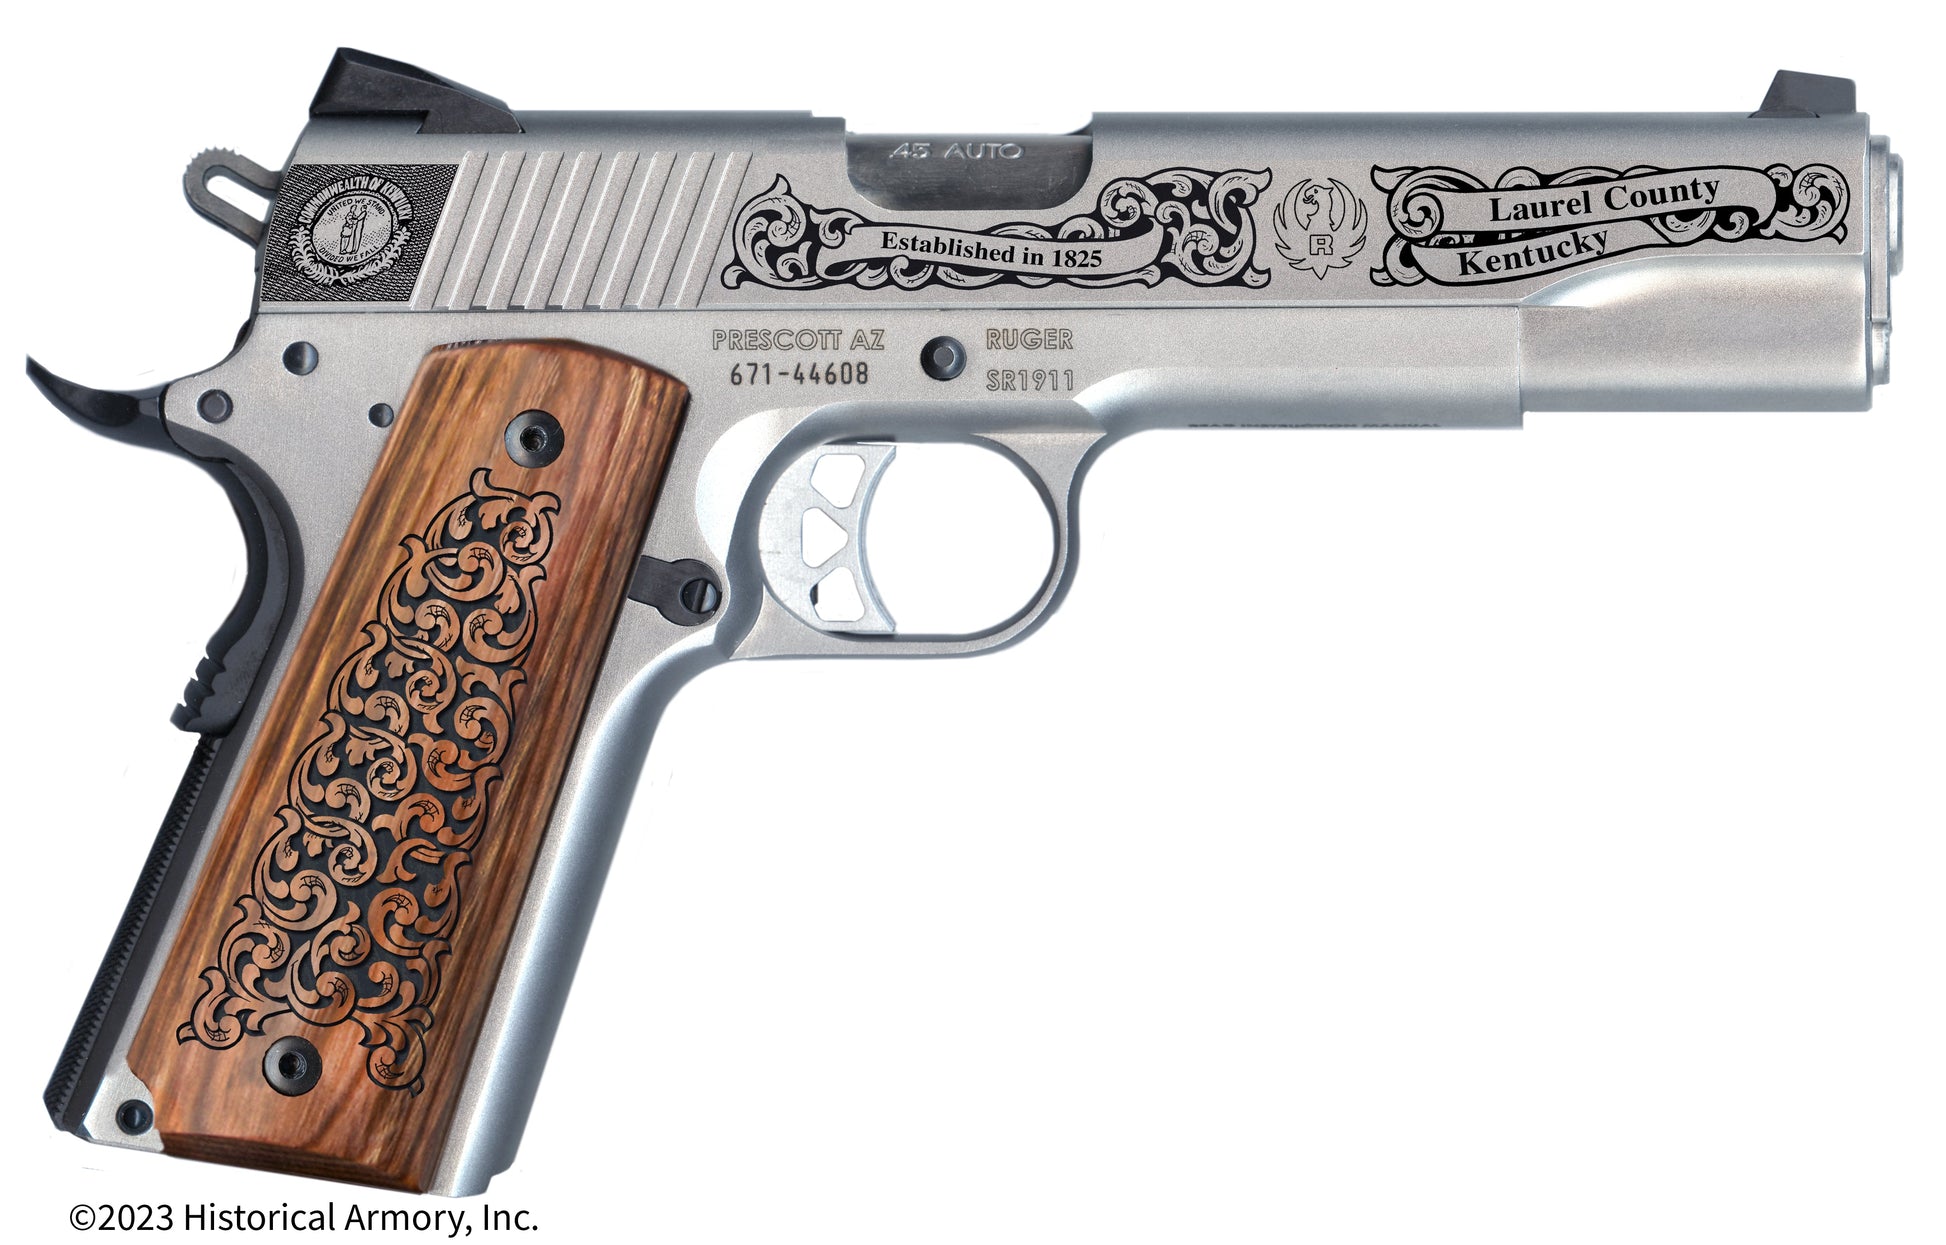 Laurel County Kentucky Engraved .45 Auto Ruger 1911